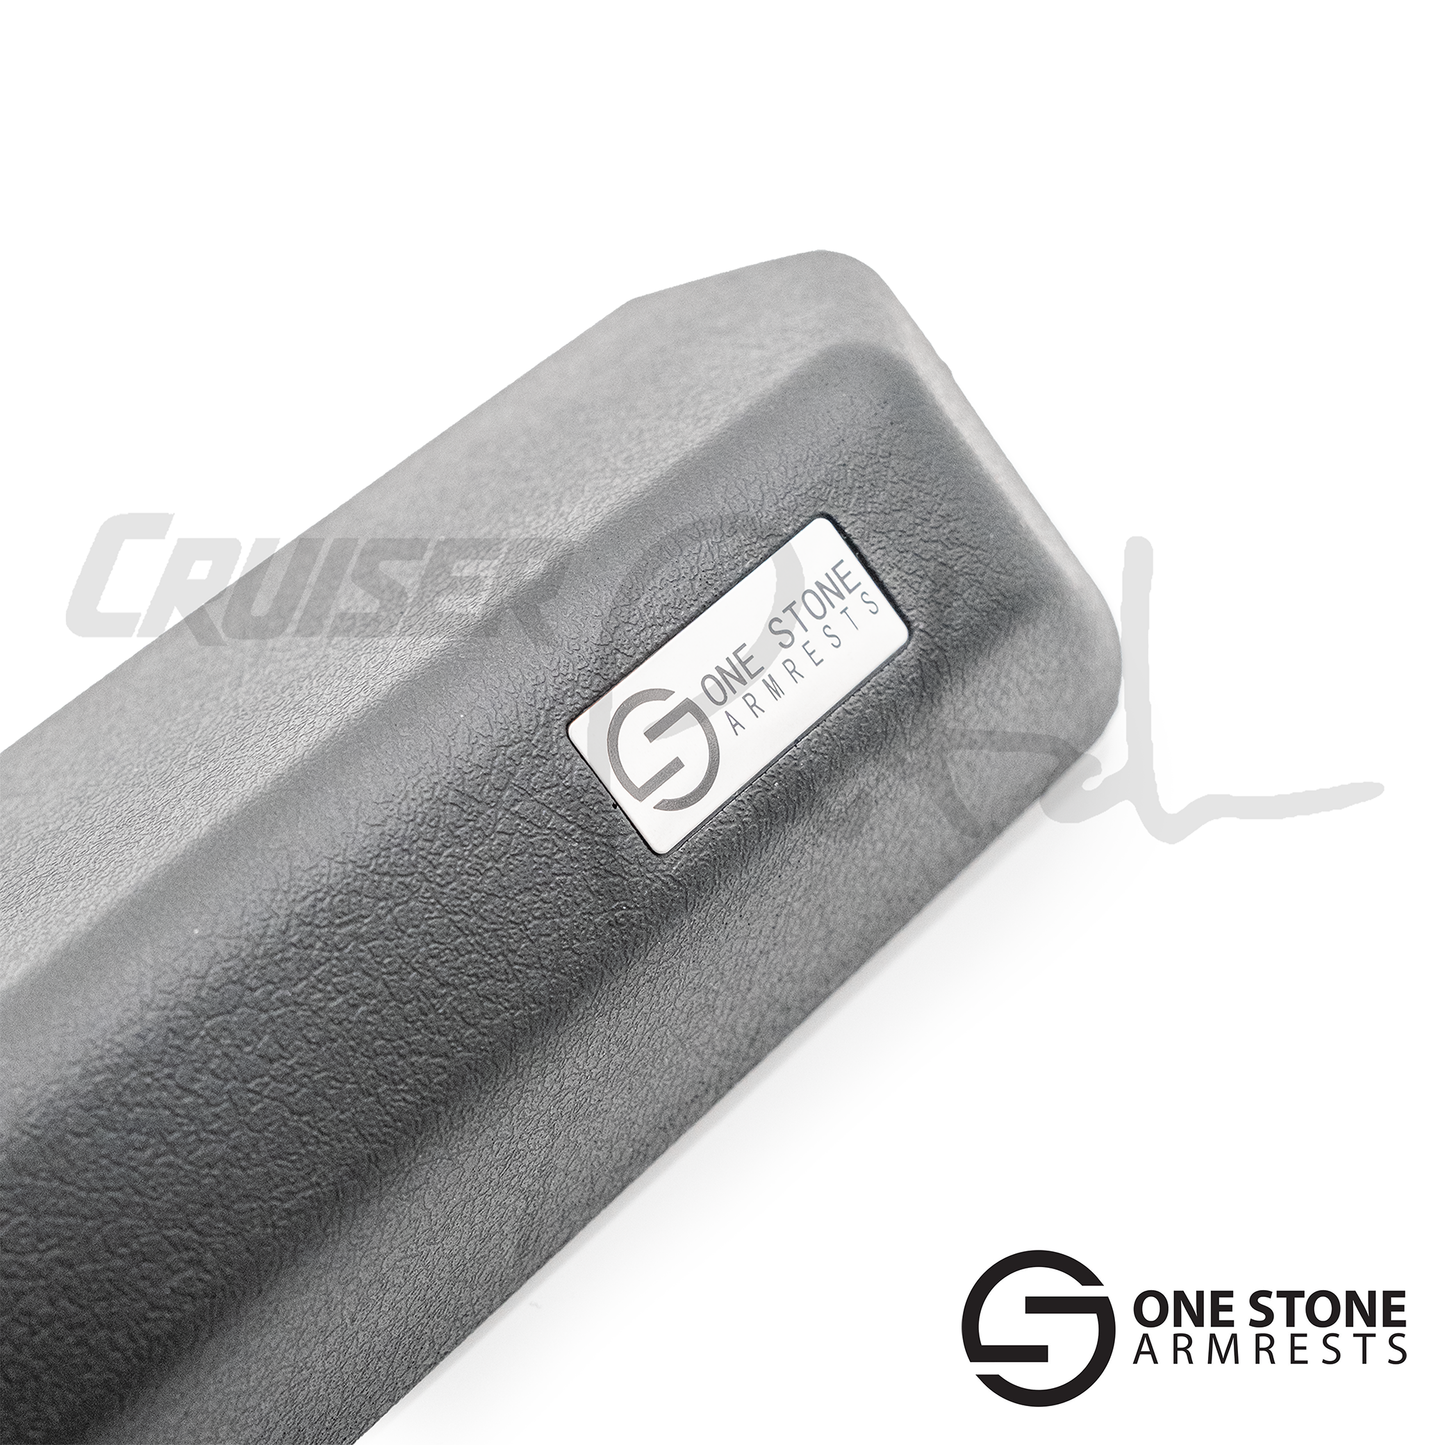 200 Series One Stone Armrests (Pair)